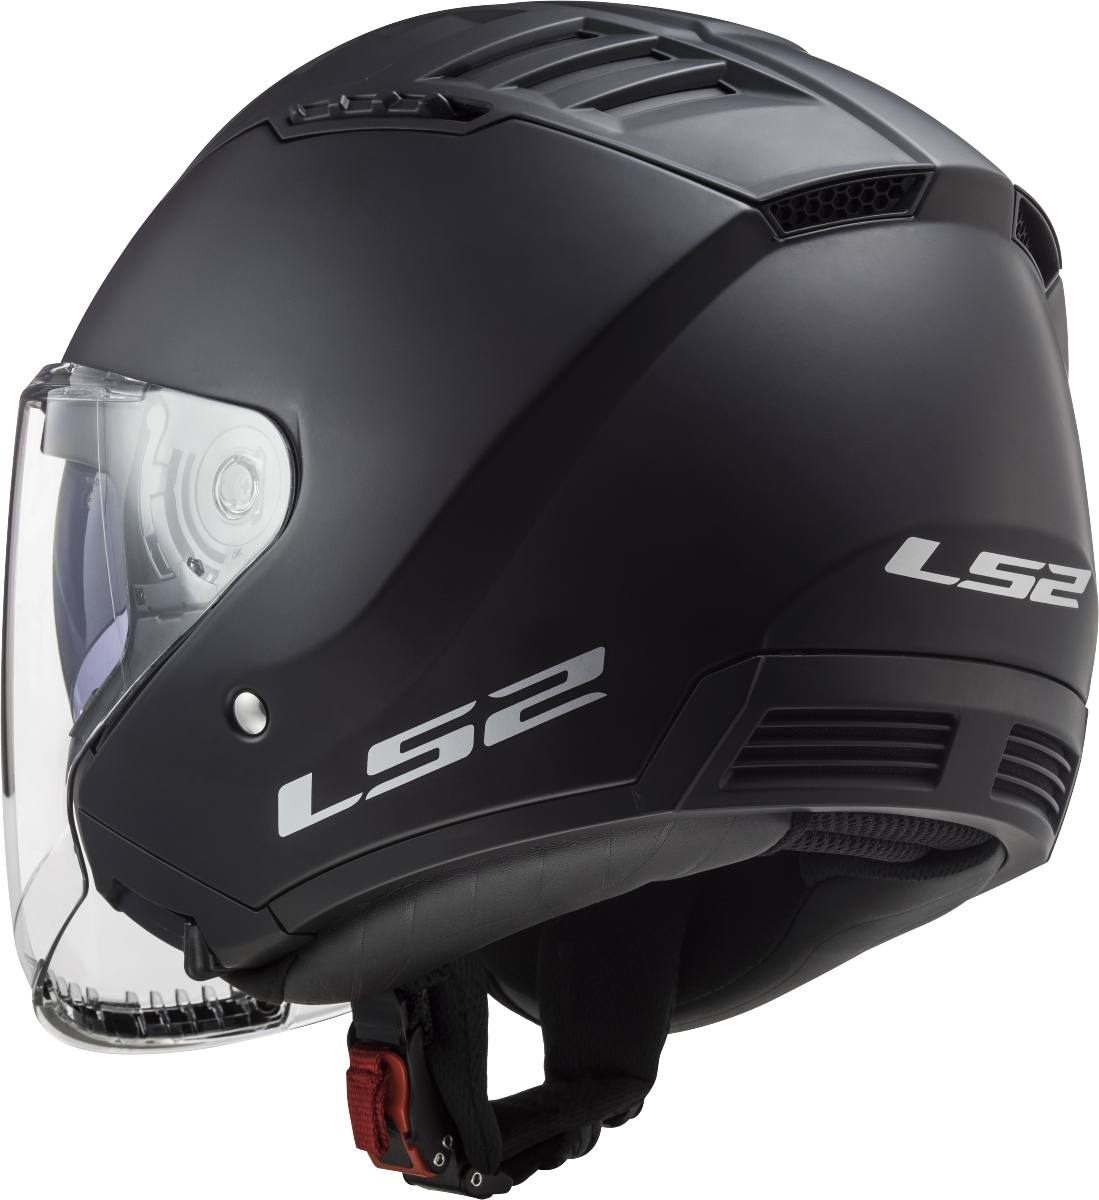 Casco LS2 OF600 COPTER SOLID NEGRO MATE 3